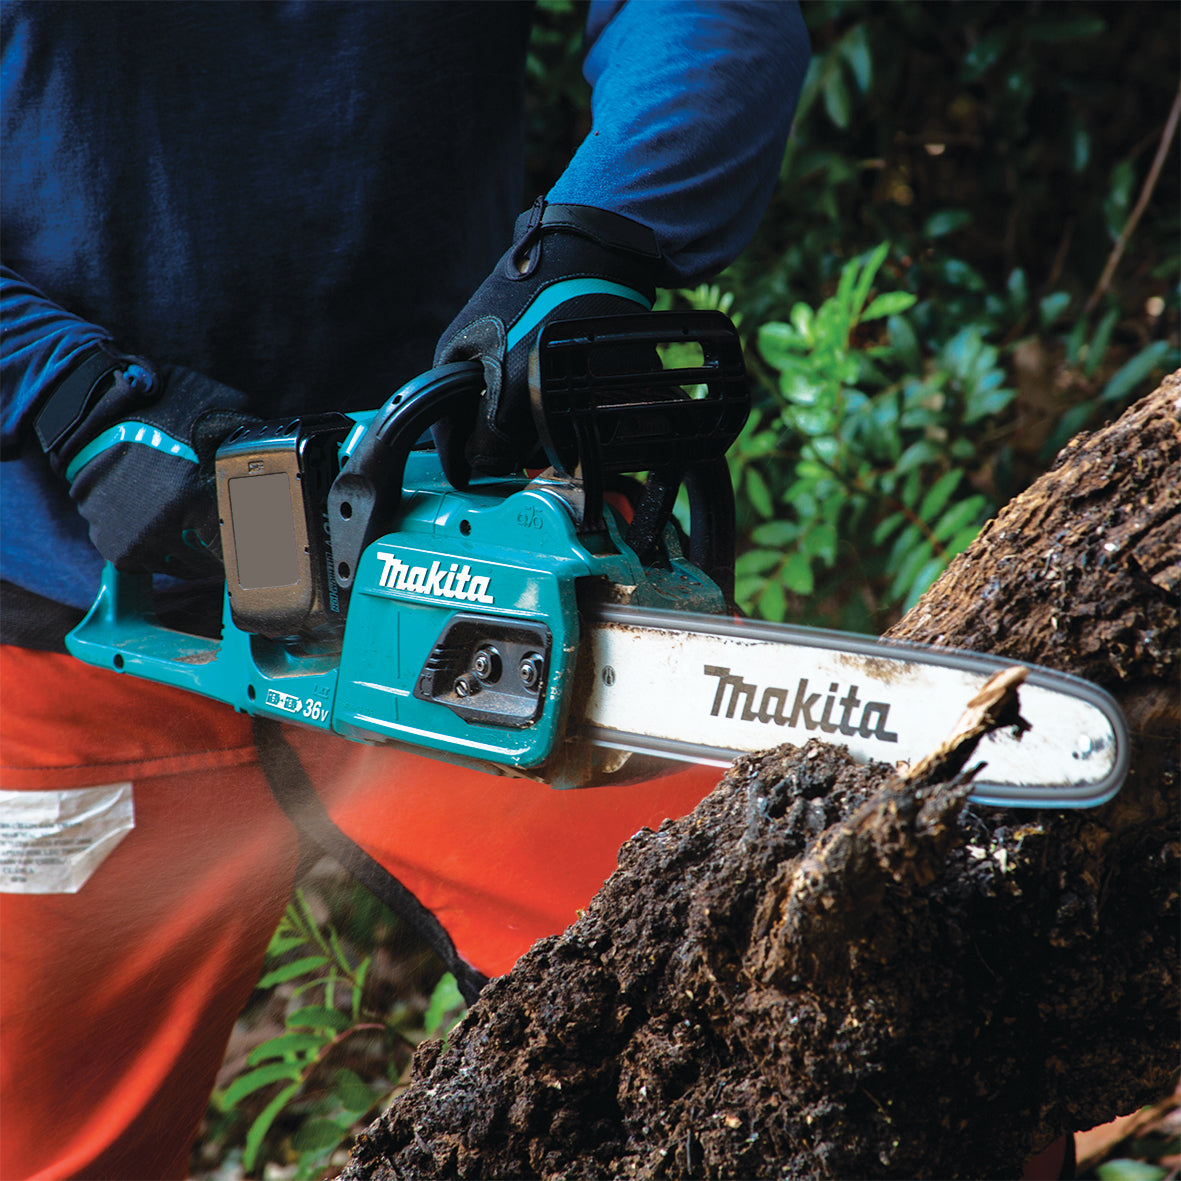 18Vx2 5.0Ah 400mm 16" Brushless Chainsaw Kit DUC405PT2 by Makita